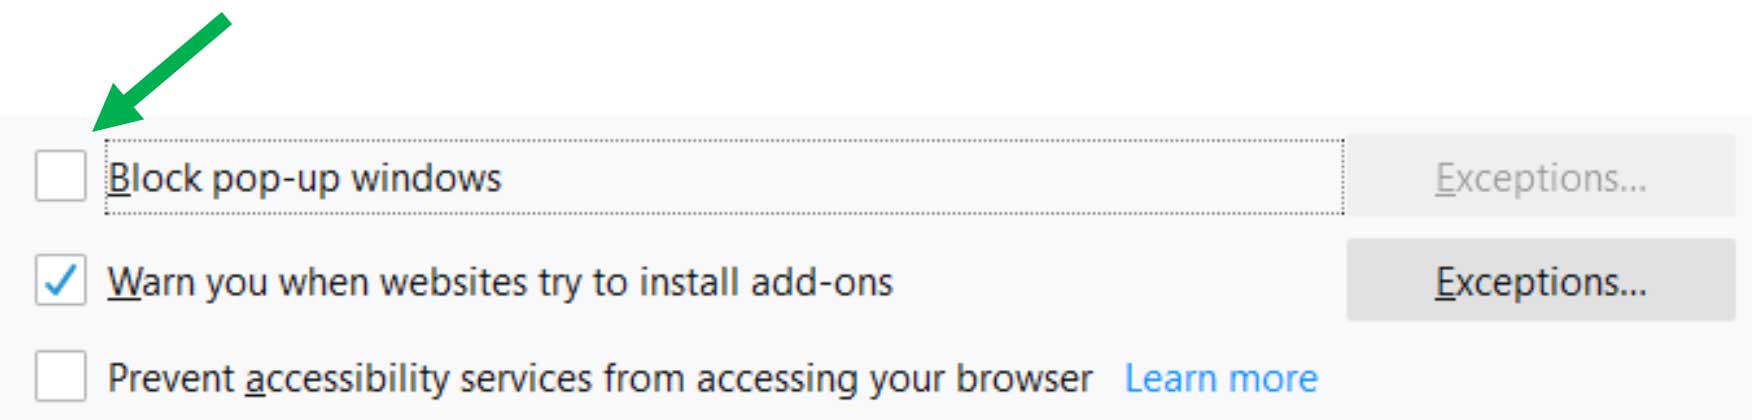 Firefox Permissions section with Block pop-up windows unchecked